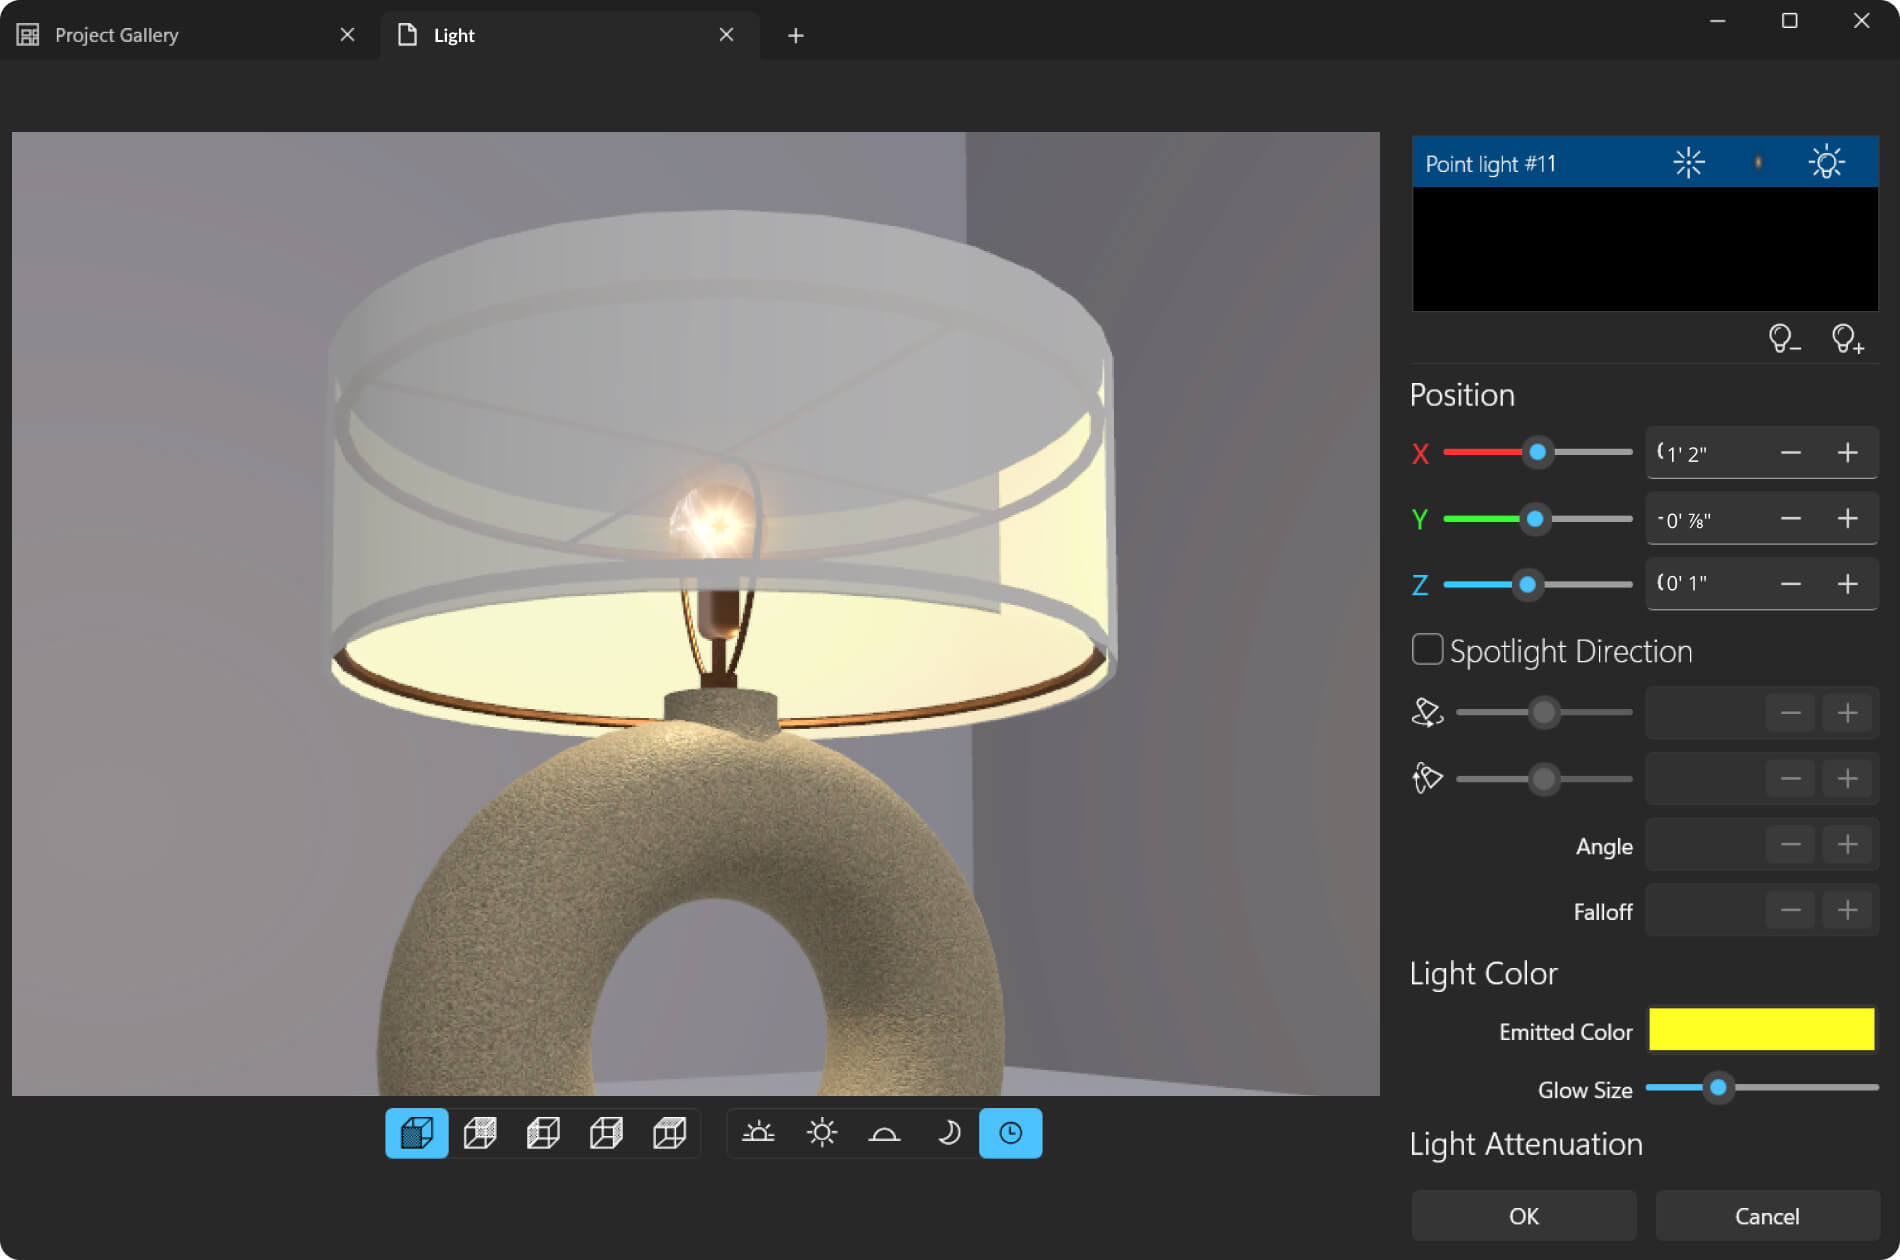 Light editor of Live Home 3D Pro for Windows.